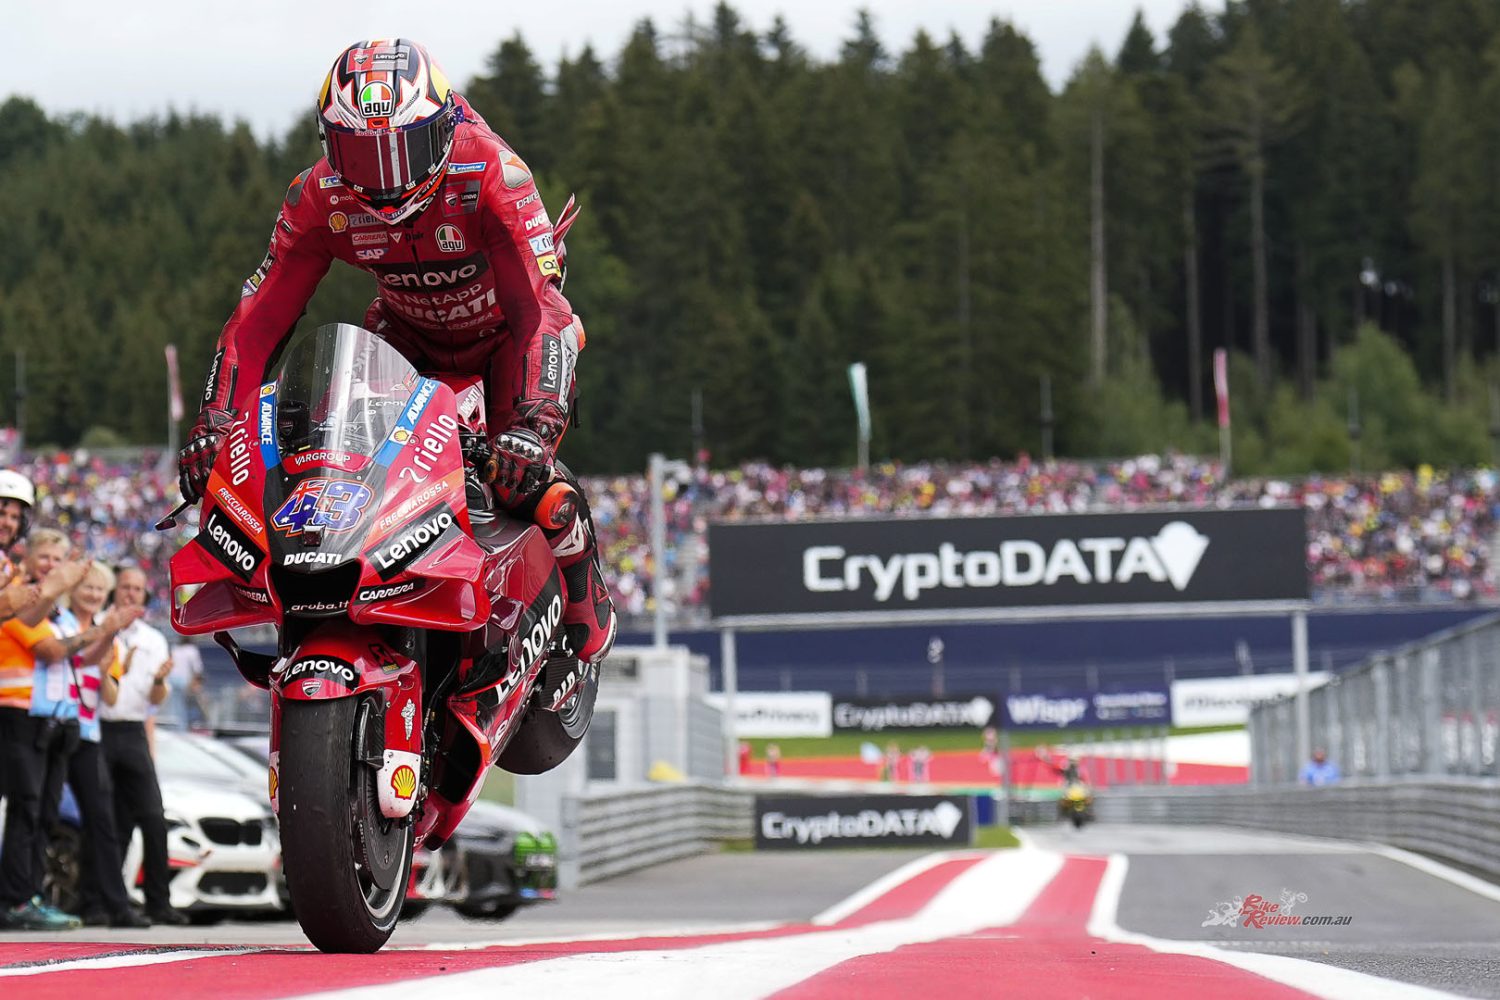 Jack Miller (Ducati Lenovo Team) was back on the podium in Austria and has been a consistent threat at the front of late.